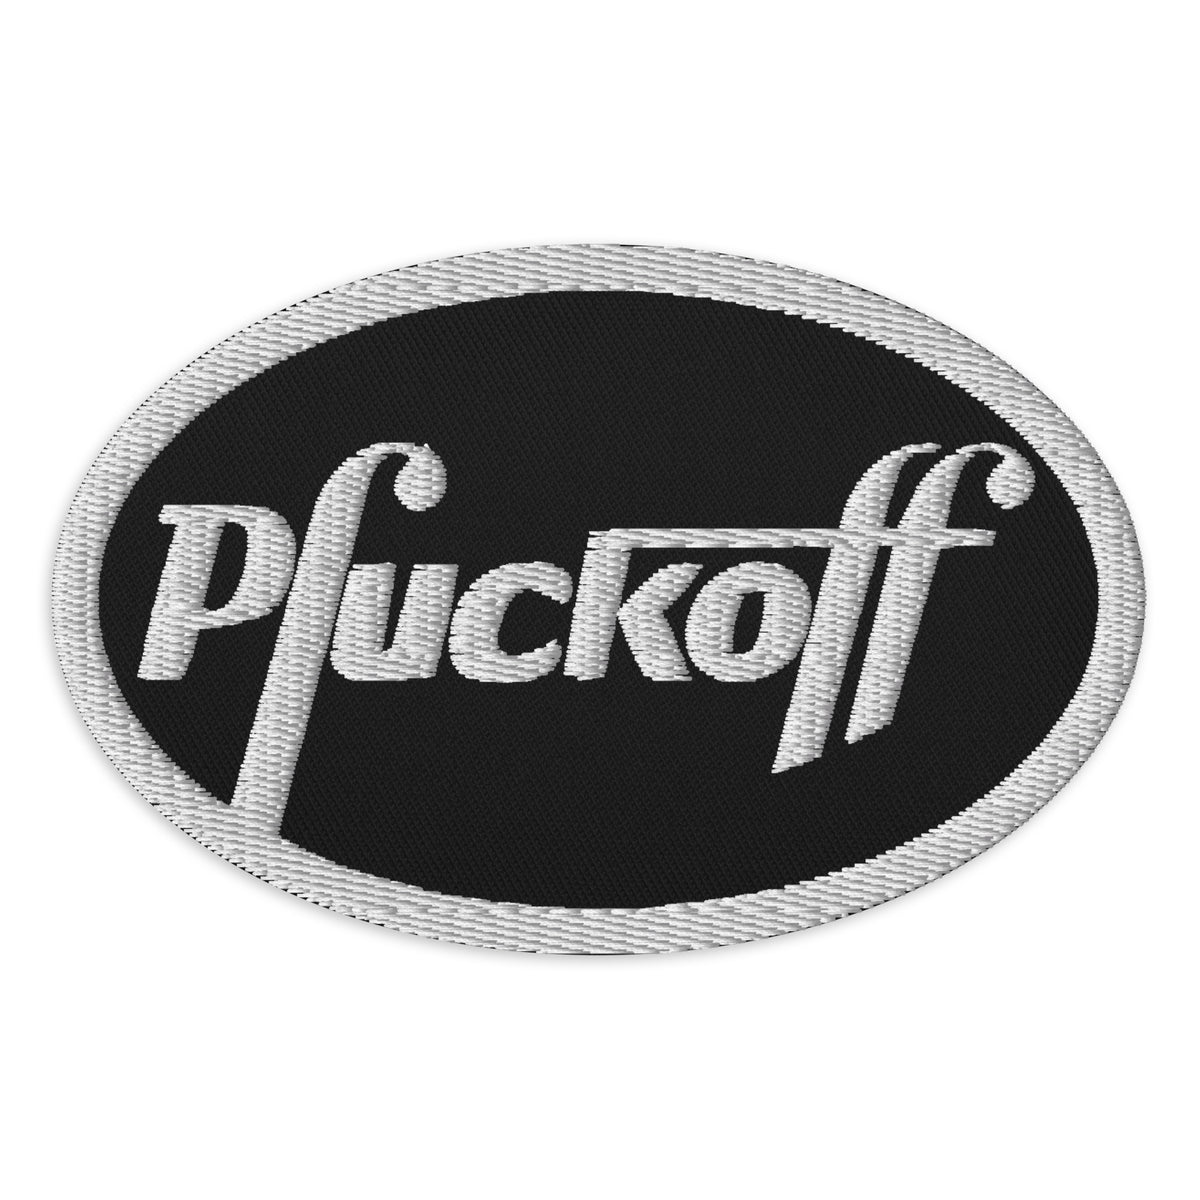 Phuckoff Embroidered patches